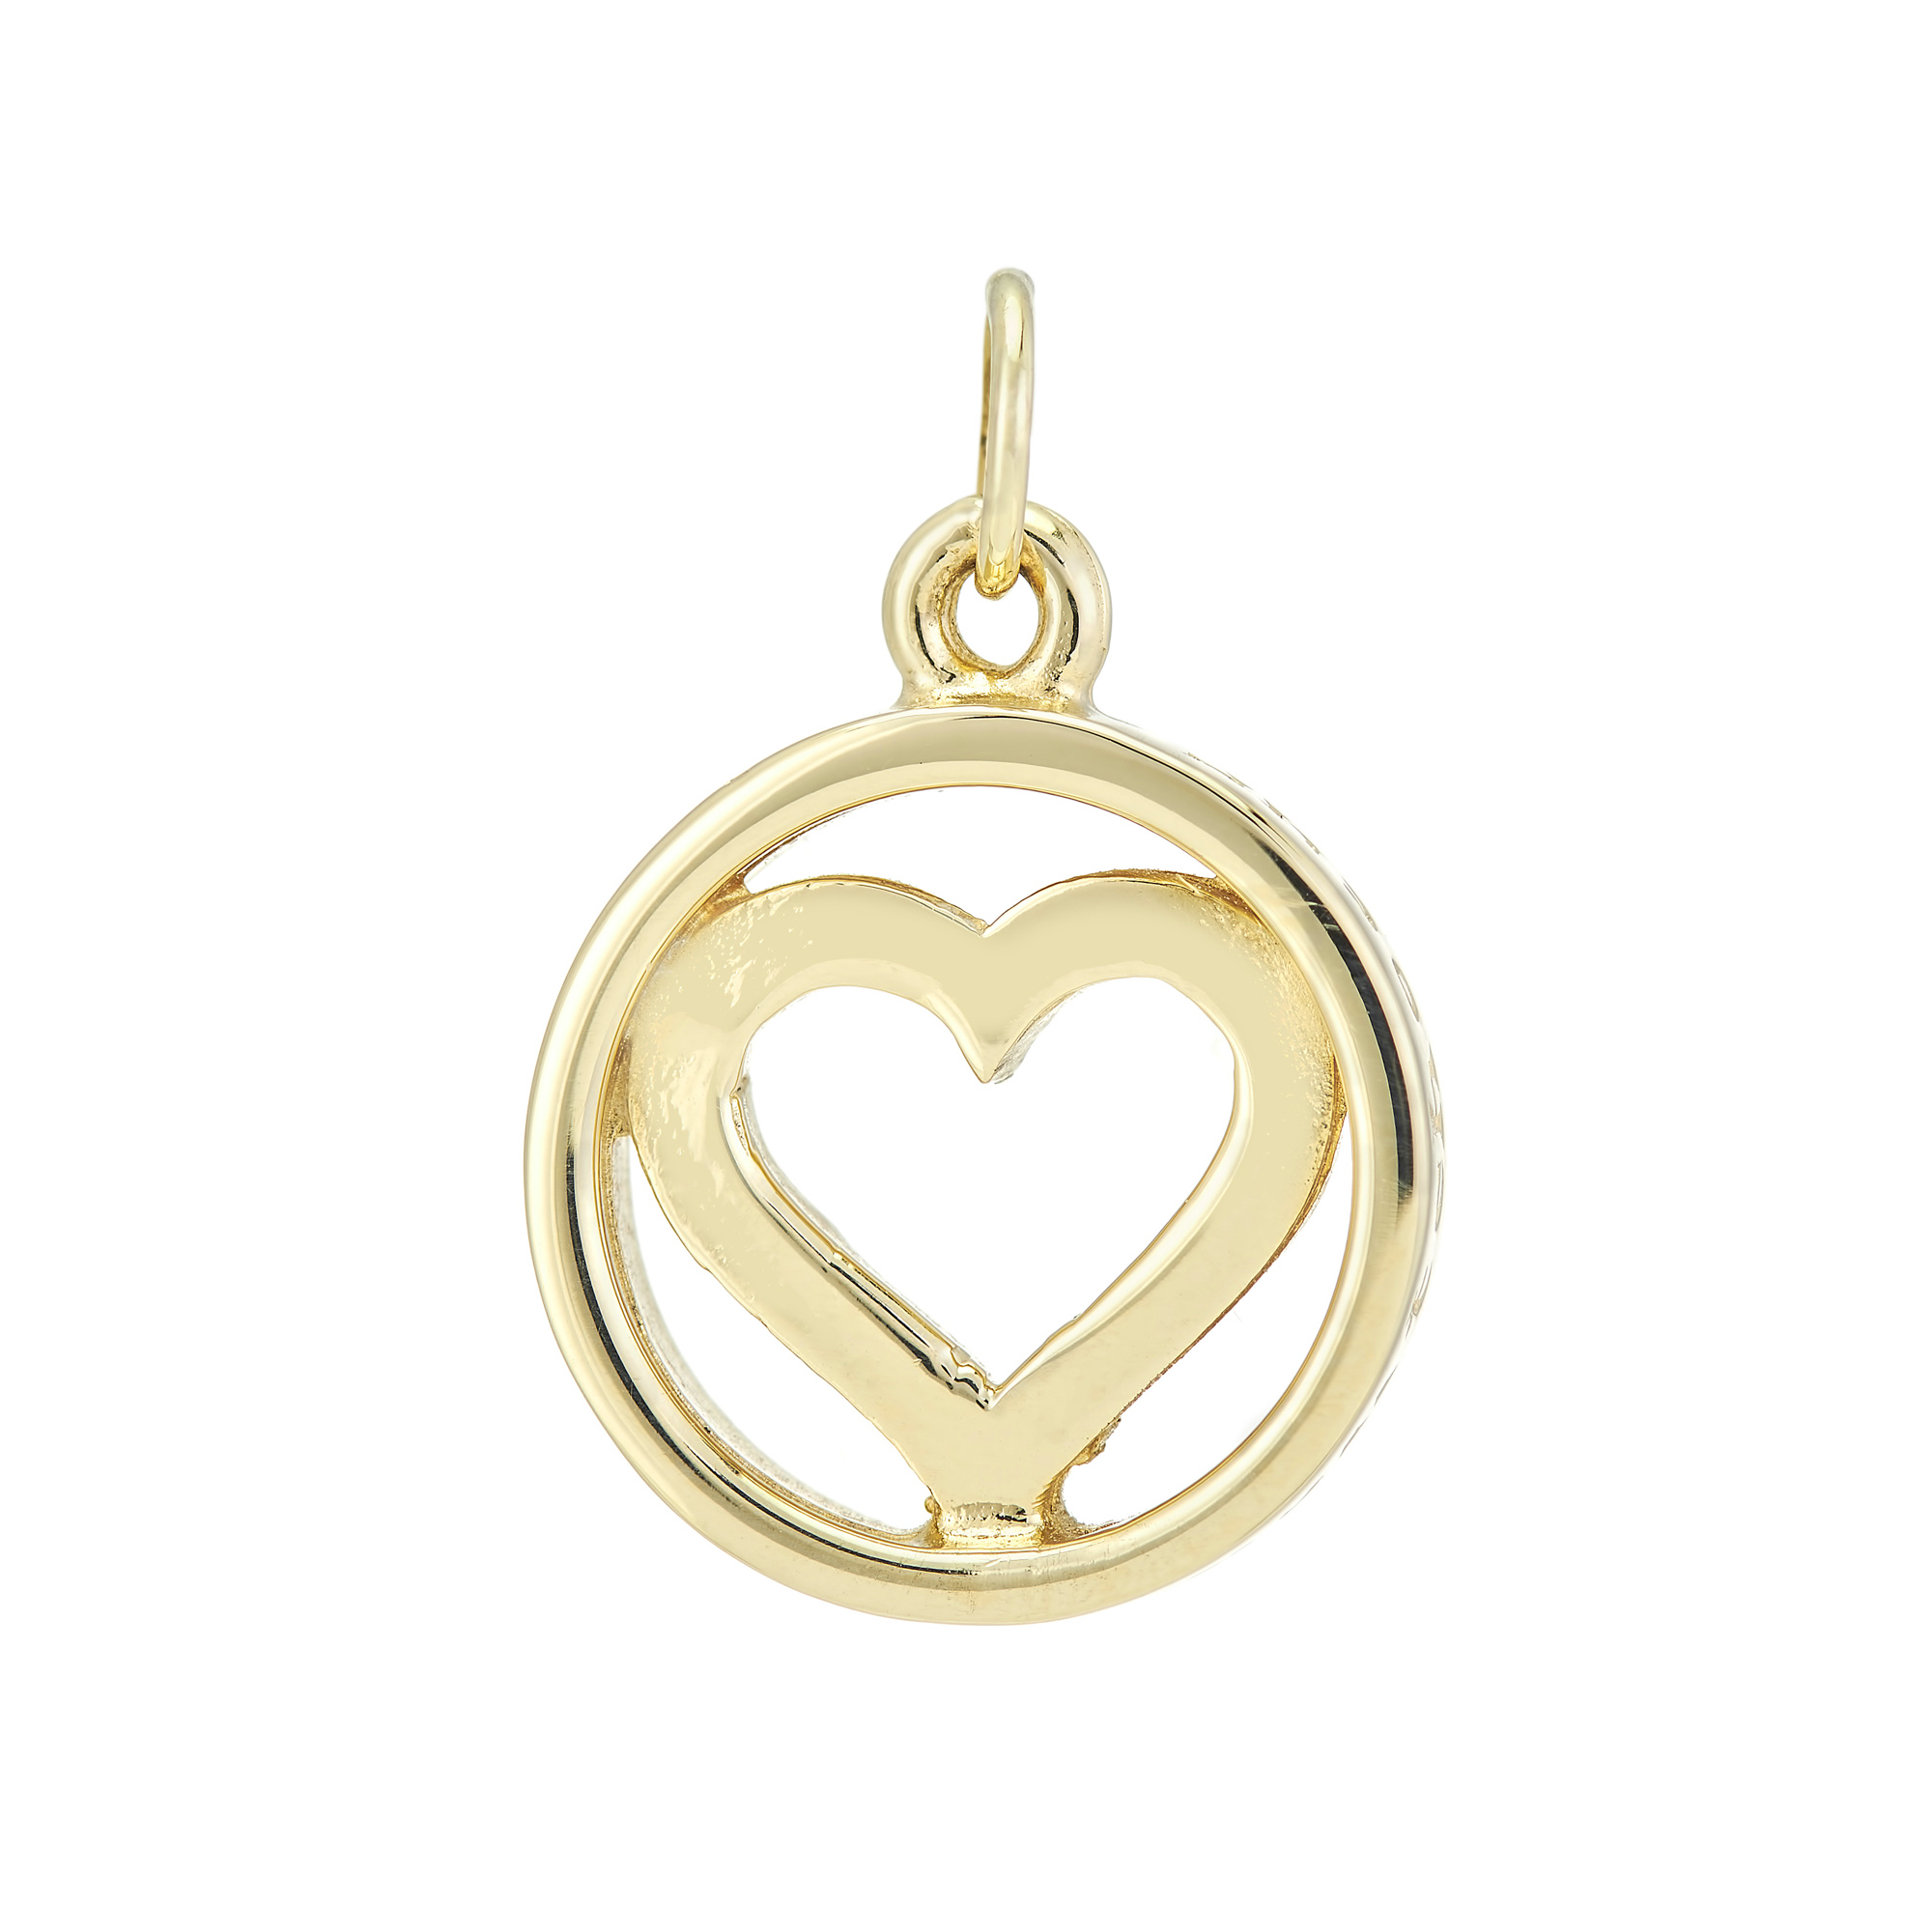 Sterling Silver and 9ct Yellow Gold Charm / Pendant (Forever in my heart)